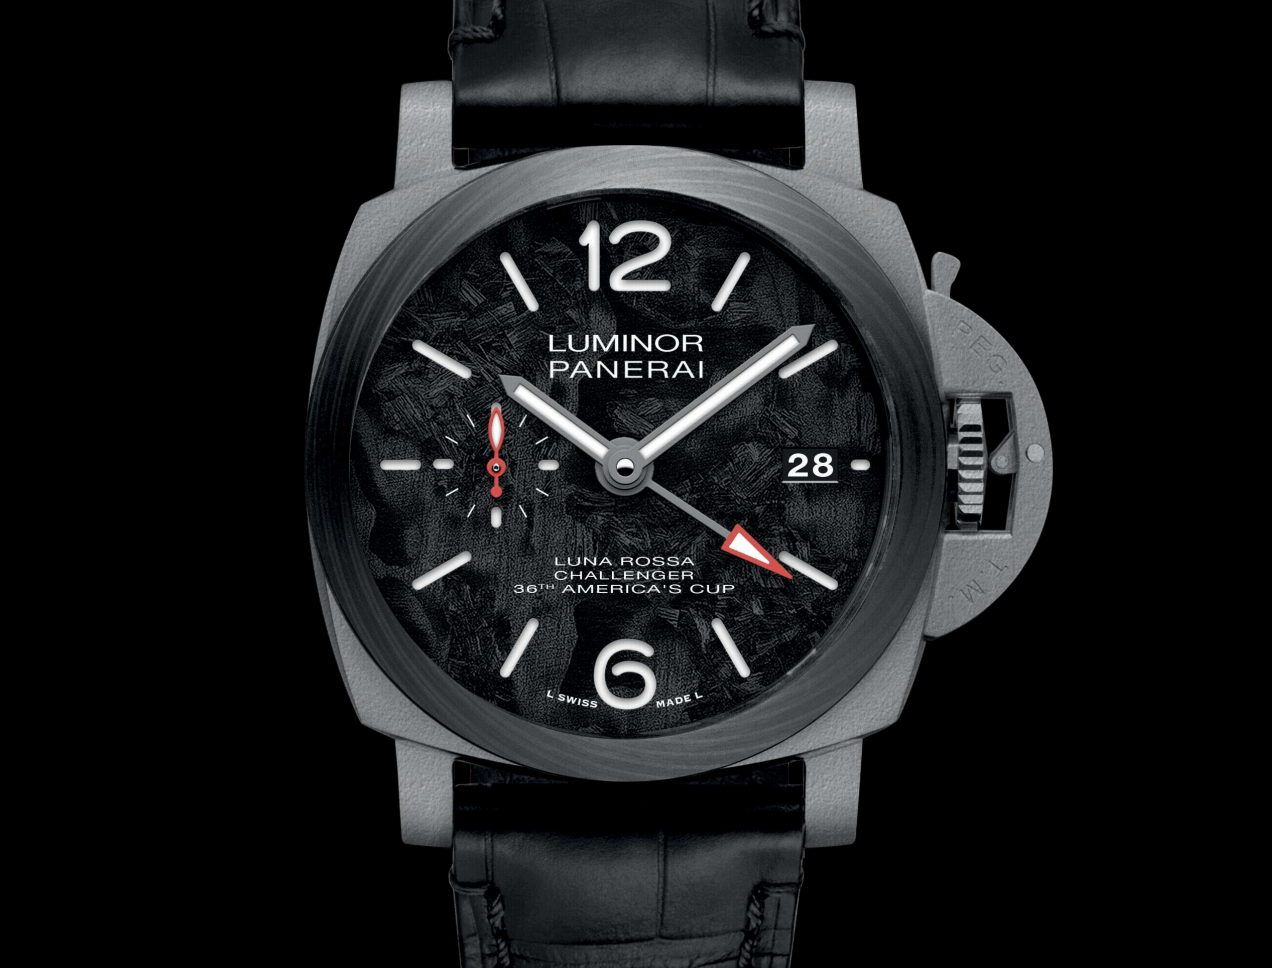 Panerai unveils two new timepieces at Watches and Wonders 2020